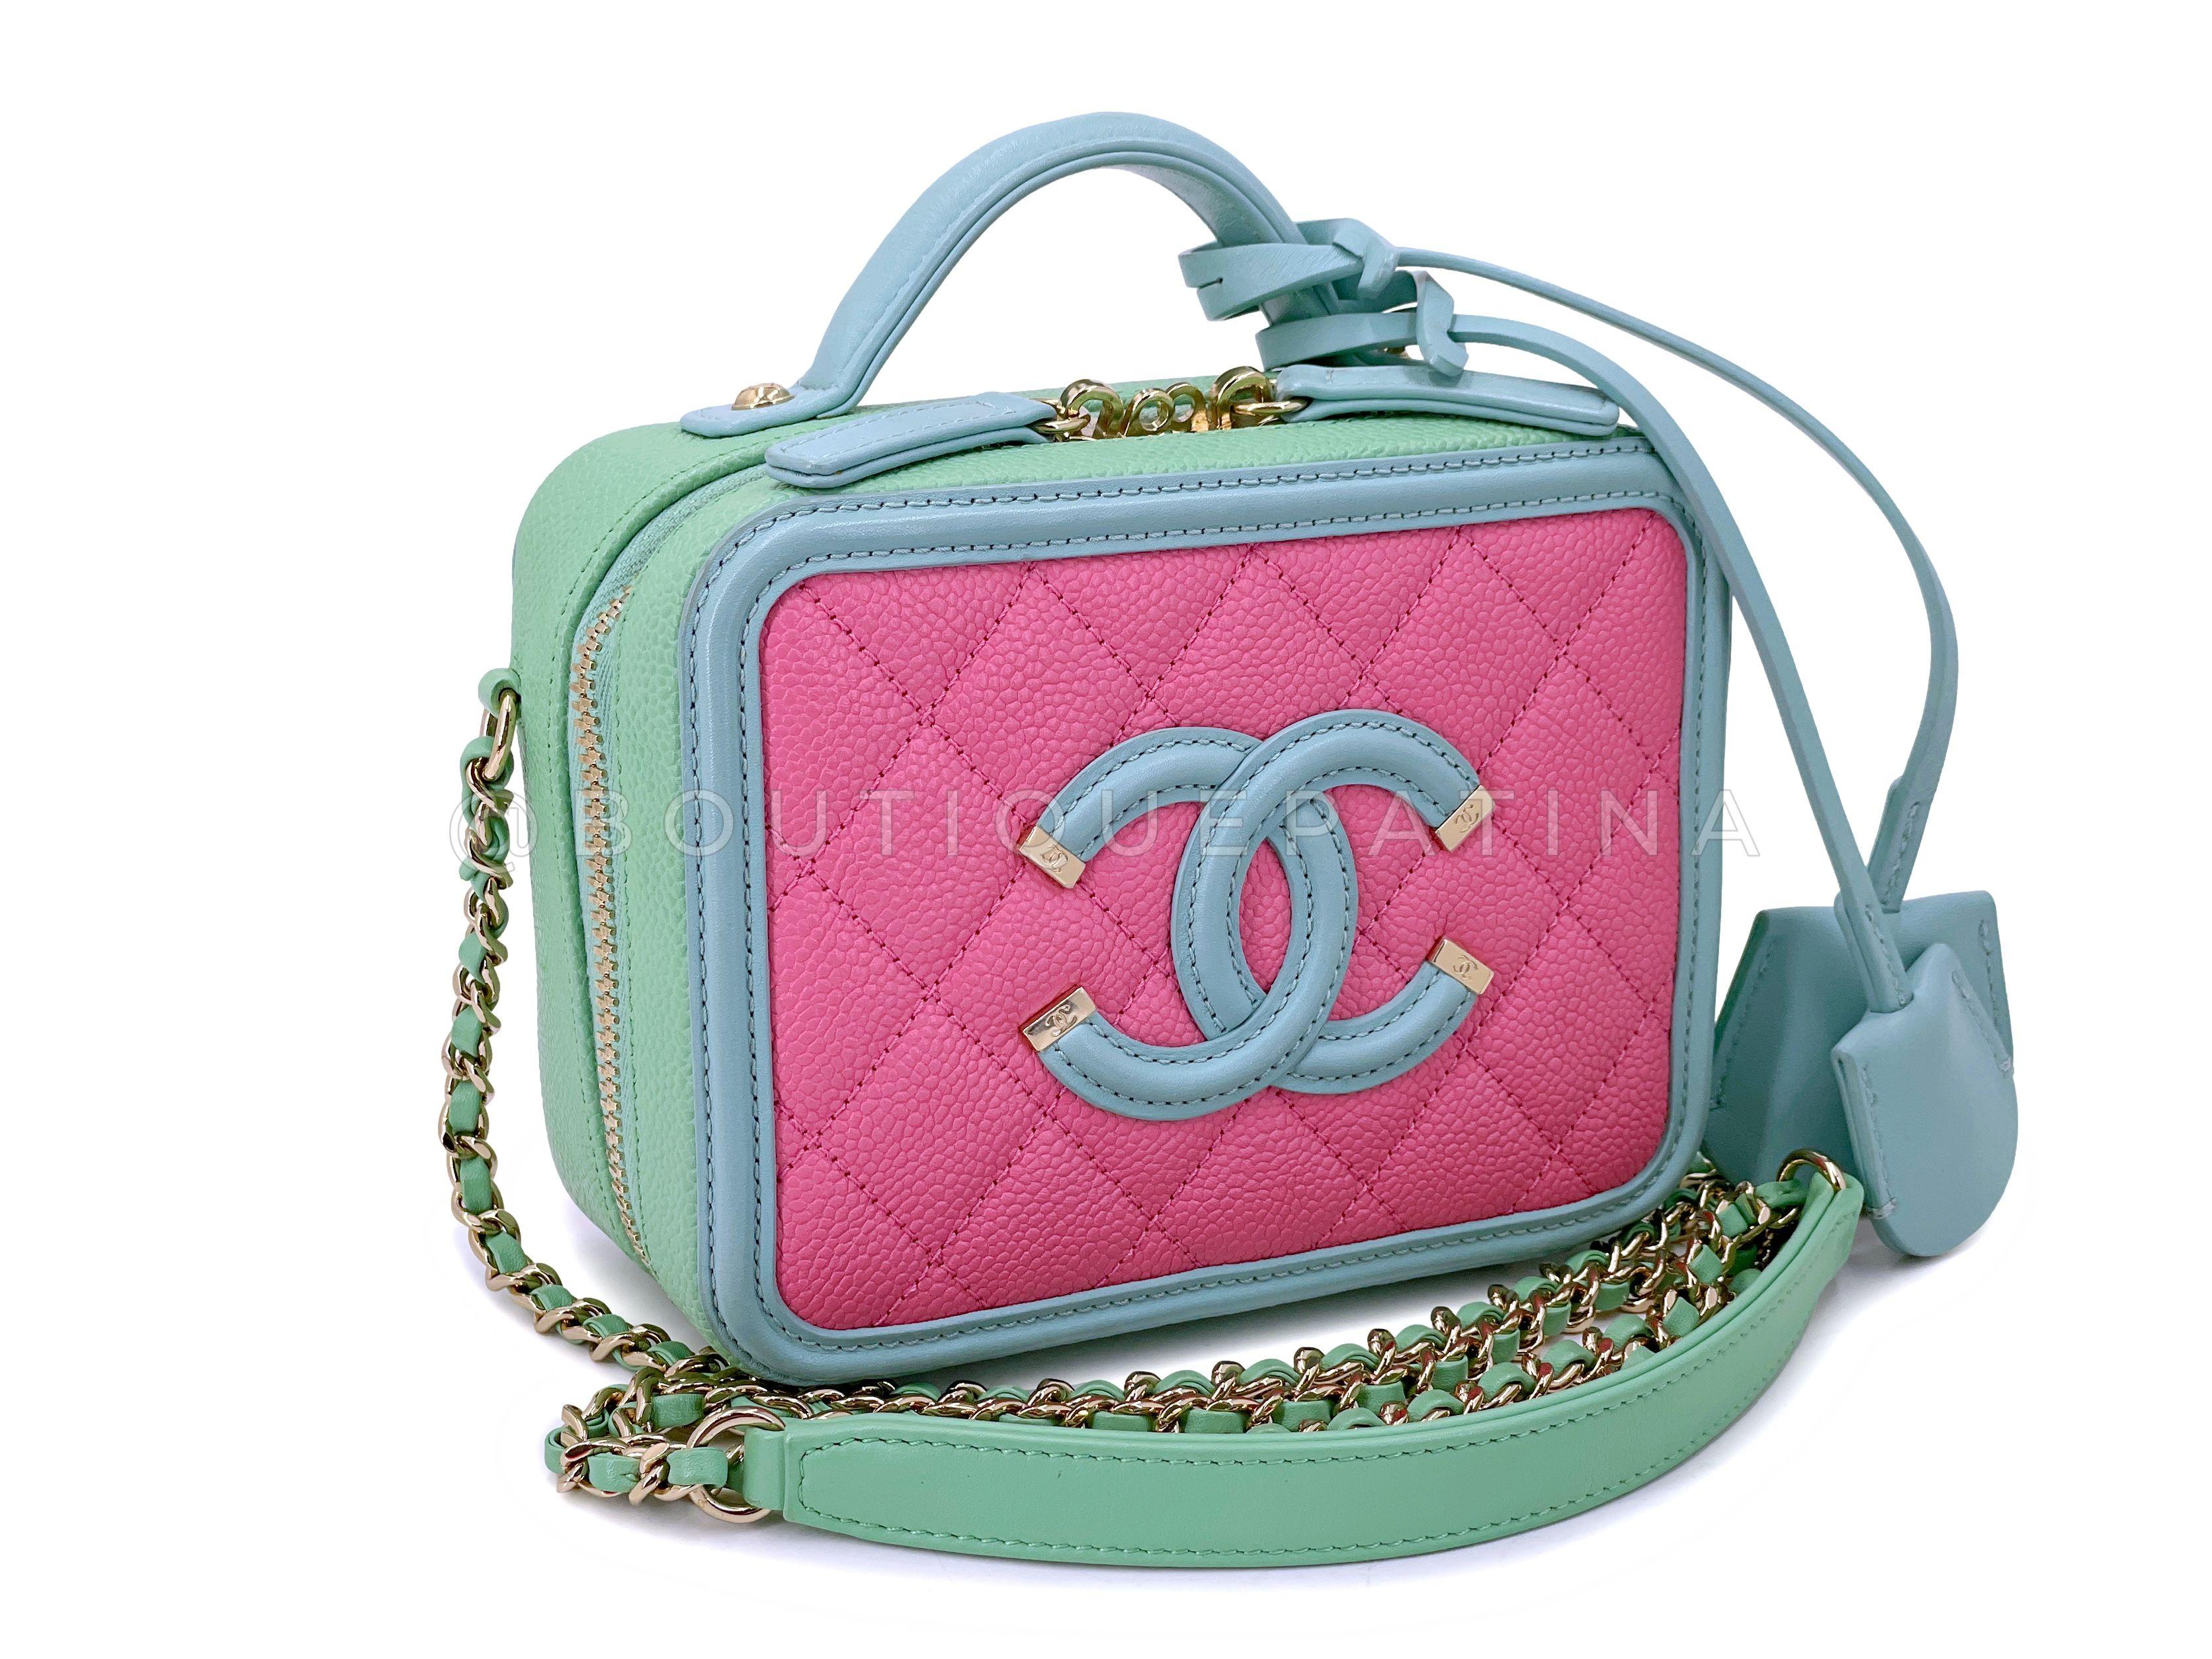 Chanel Lunch Box Bag - 3 For Sale on 1stDibs  chanel lunch box bag dupe, chanel  vanity lunch box bag, chanel bag lunch box